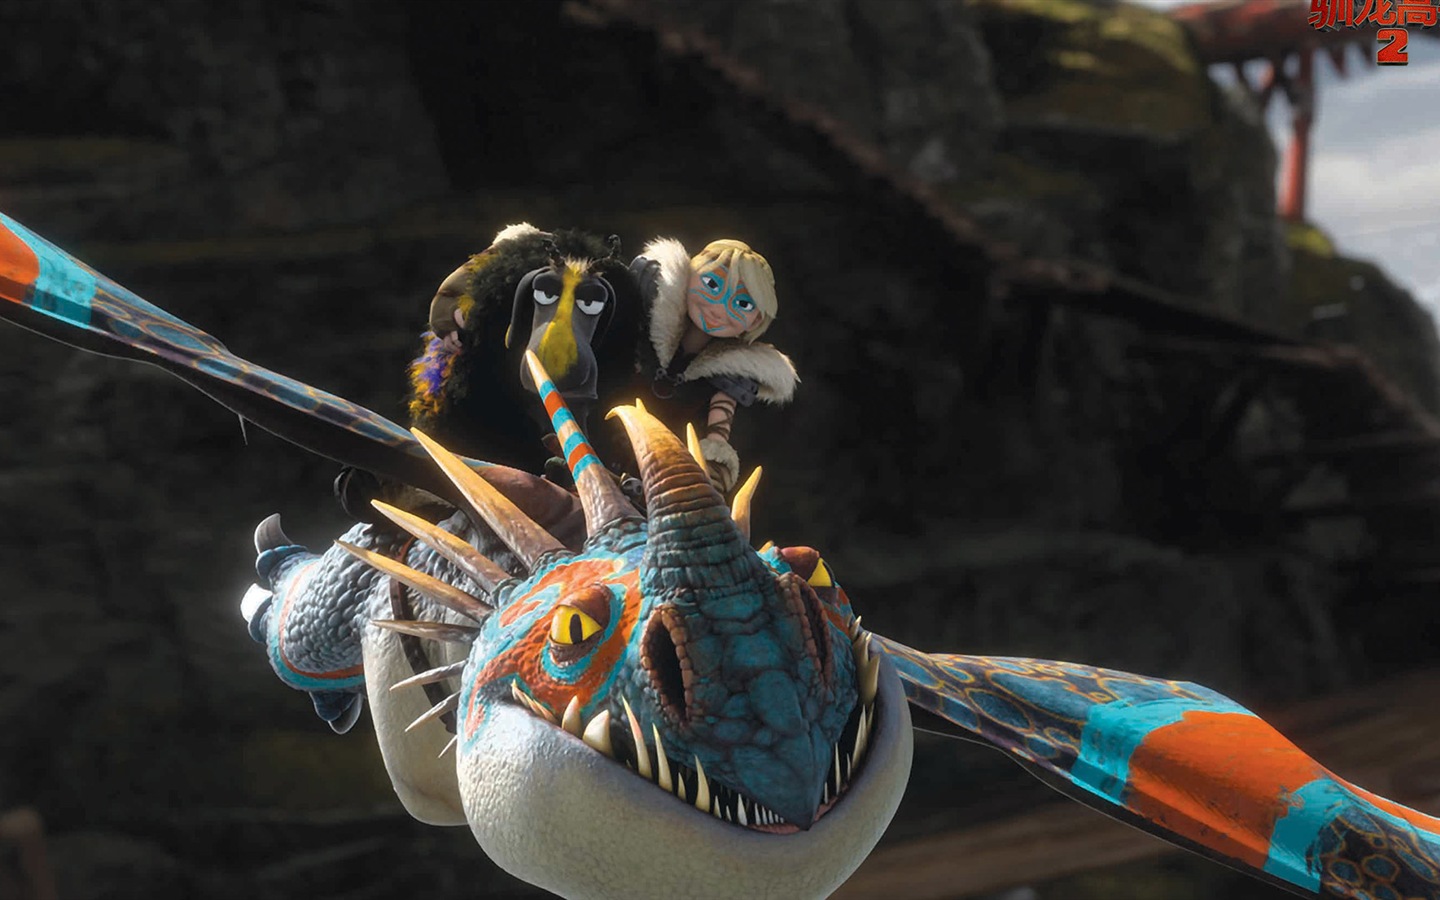 How to Train Your Dragon 2 HD wallpapers #11 - 1440x900